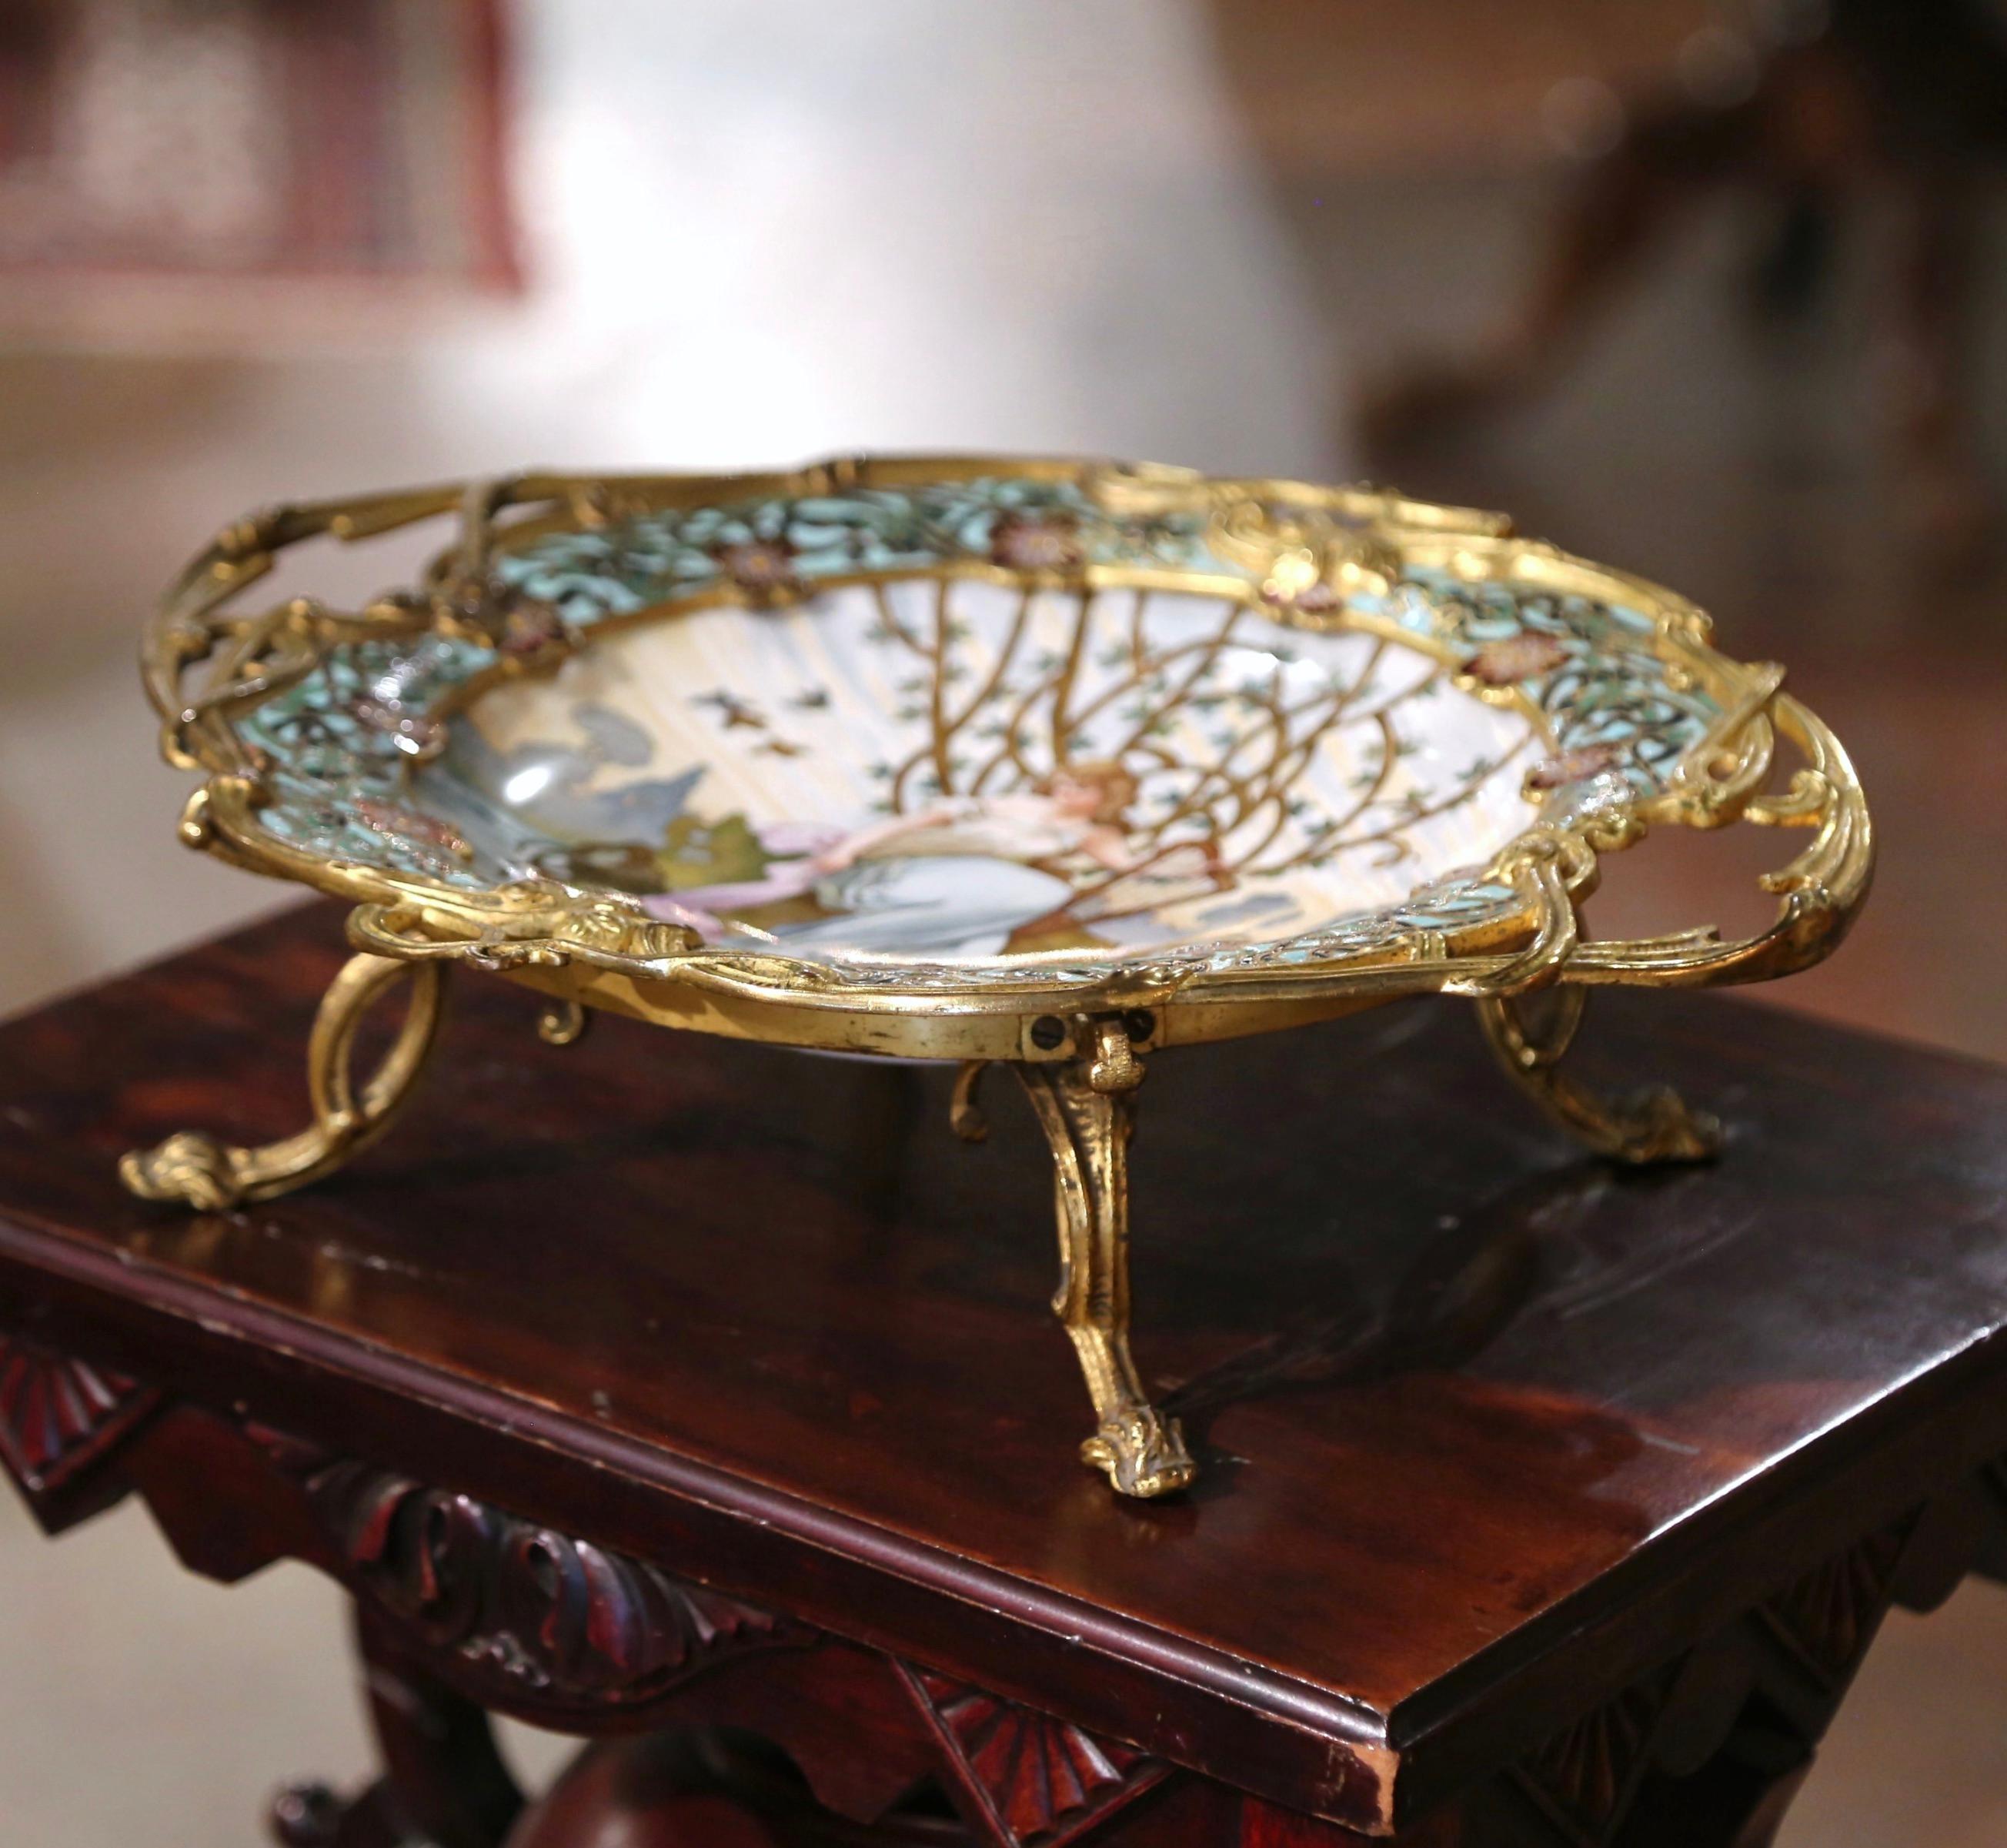 Decorate a dining table or a console with this elegant antique centerpiece. Crafted in France circa 1890, and signed Tisserand, the colorful tray stands on small curved feet over an oval porcelain plate decorated with a Champleve border with floral